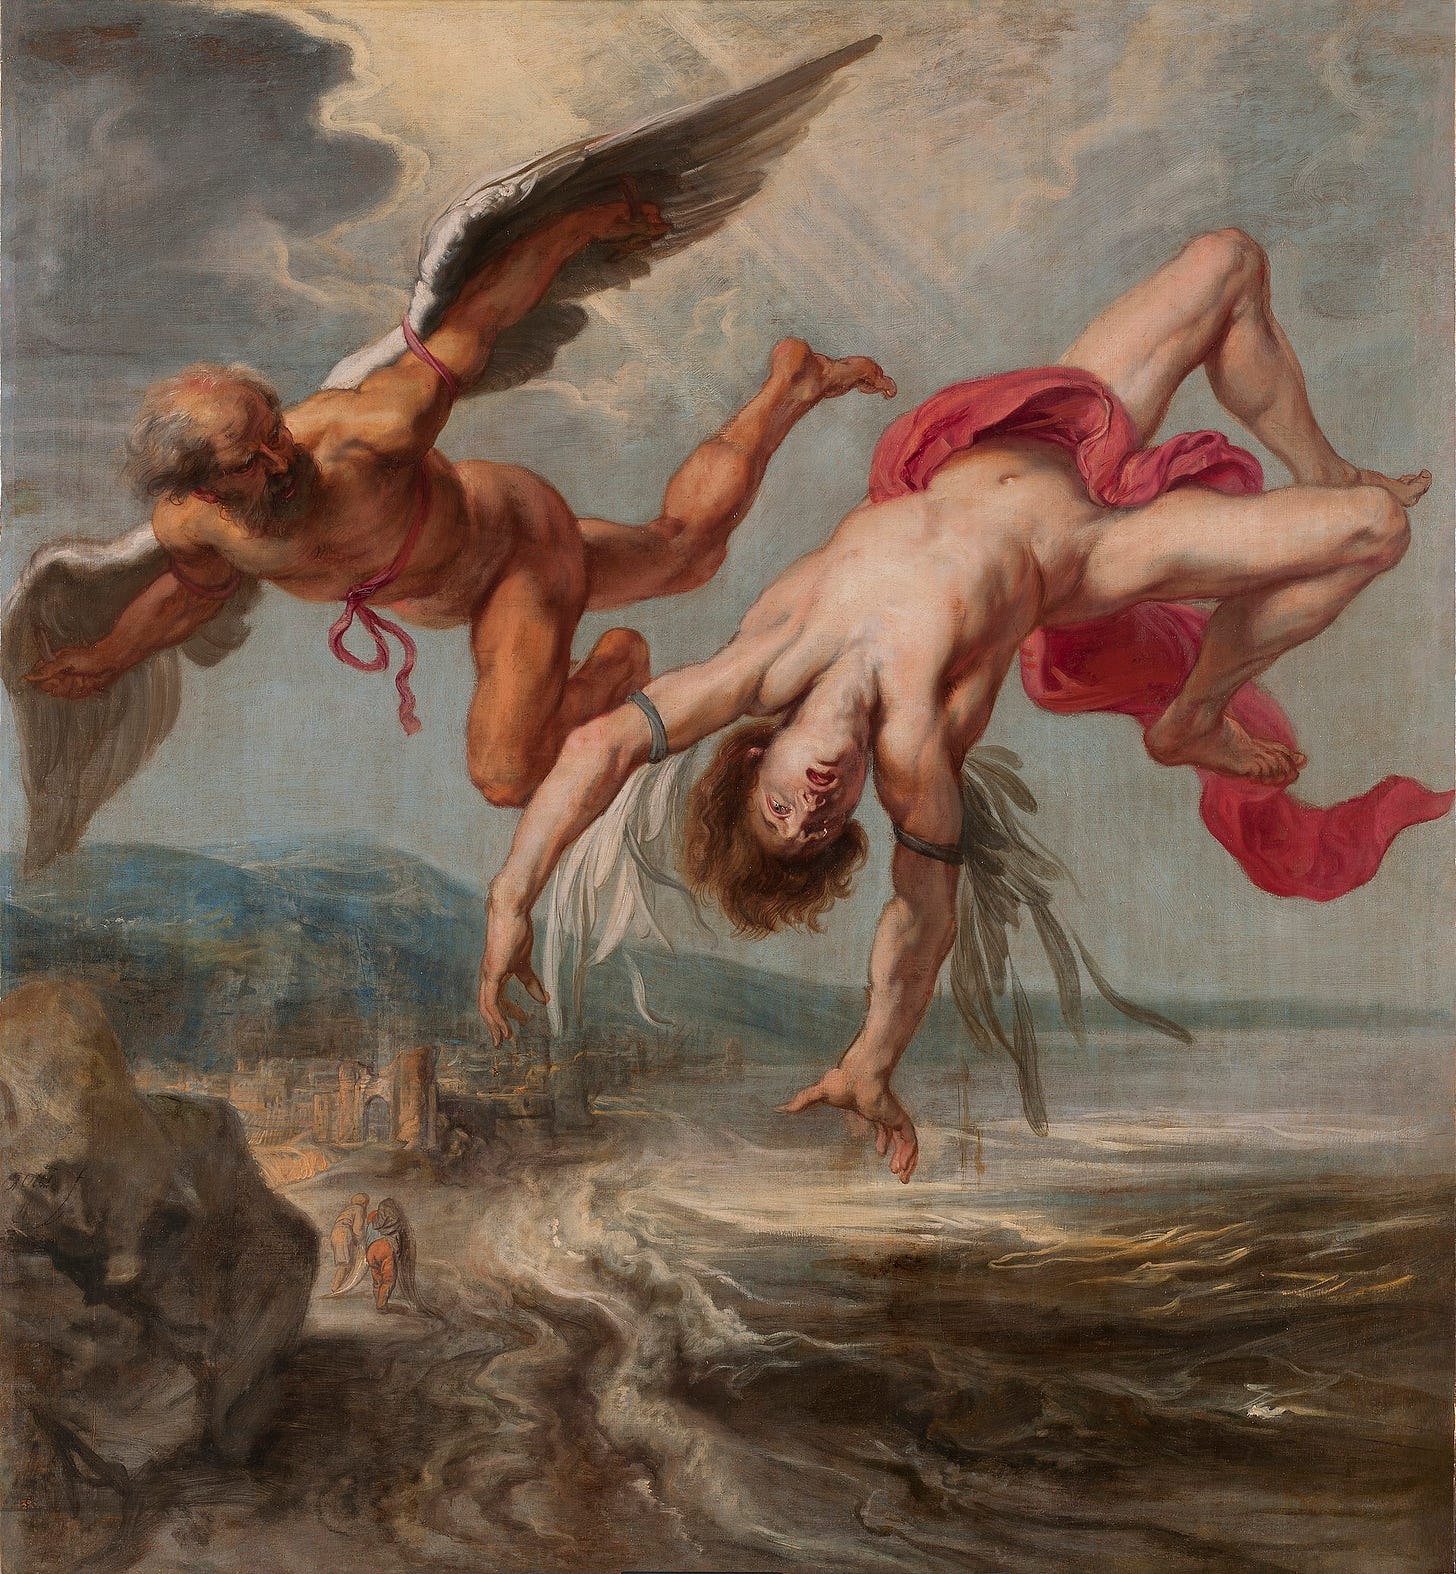 Jacob Peter Gowy's The Flight of Icarus